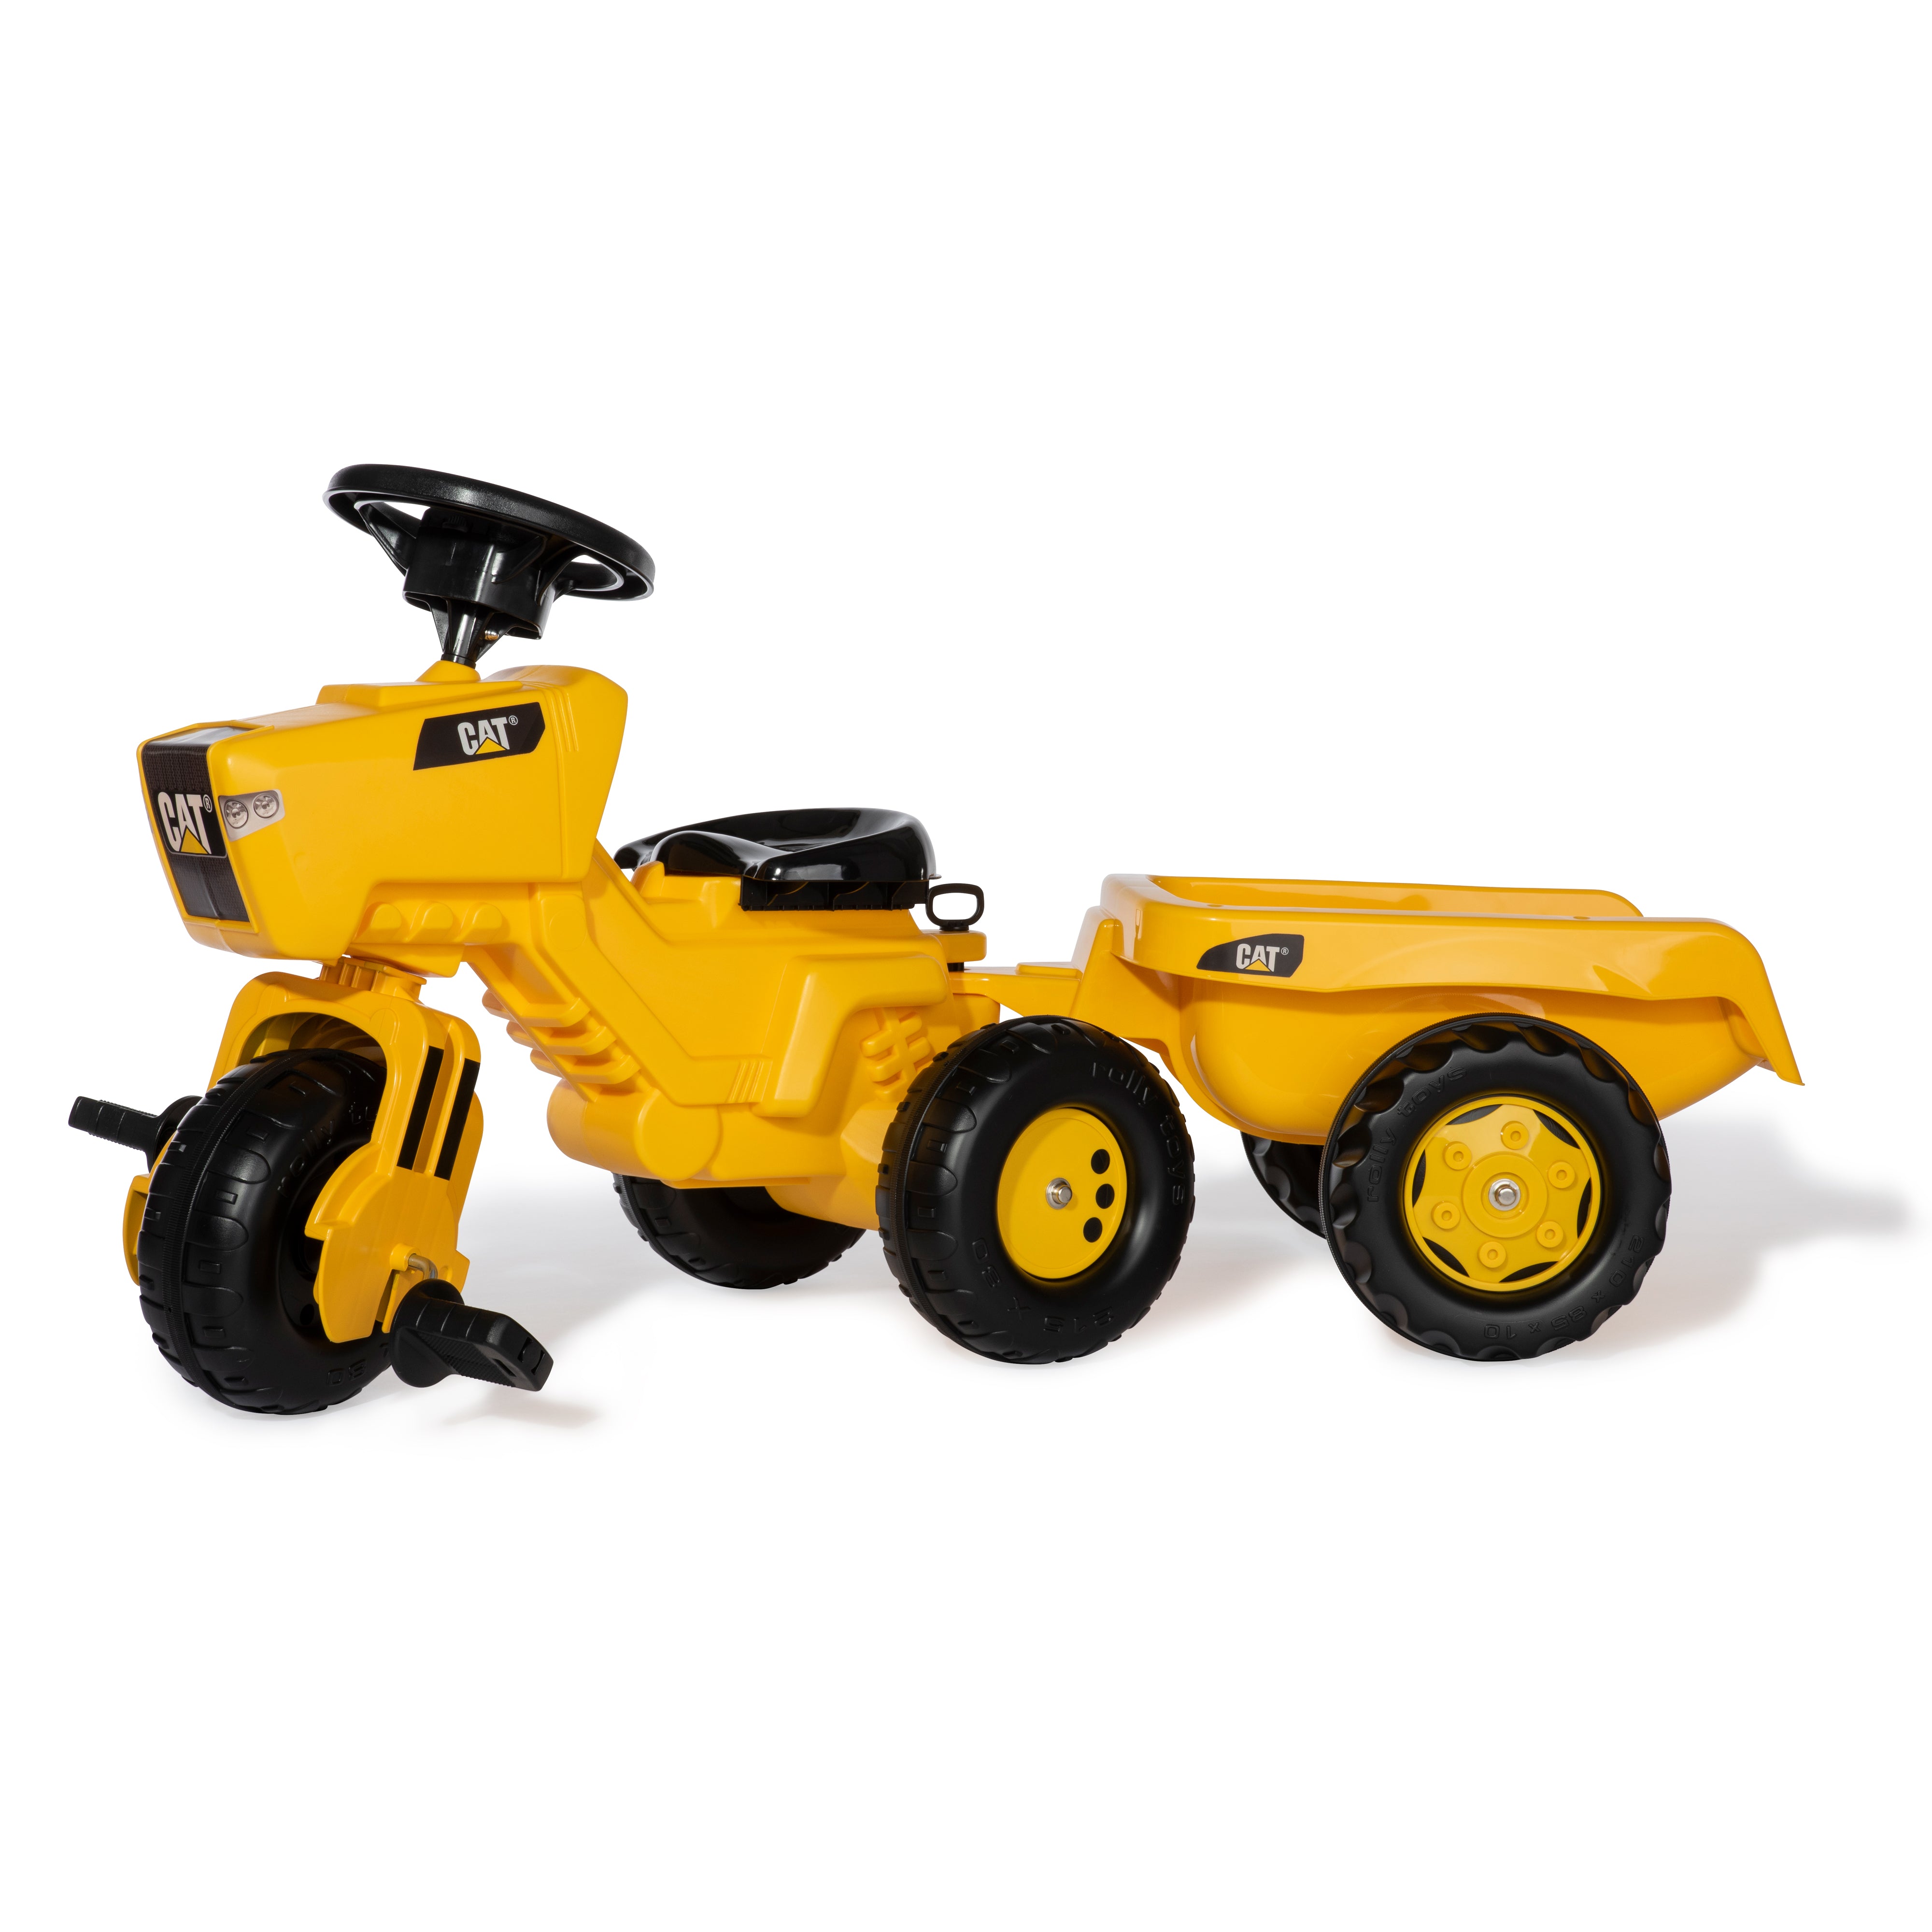 This CAT® Pedal Vehicle is on three wheels so it rides like a Tricycle with the look of a tractor